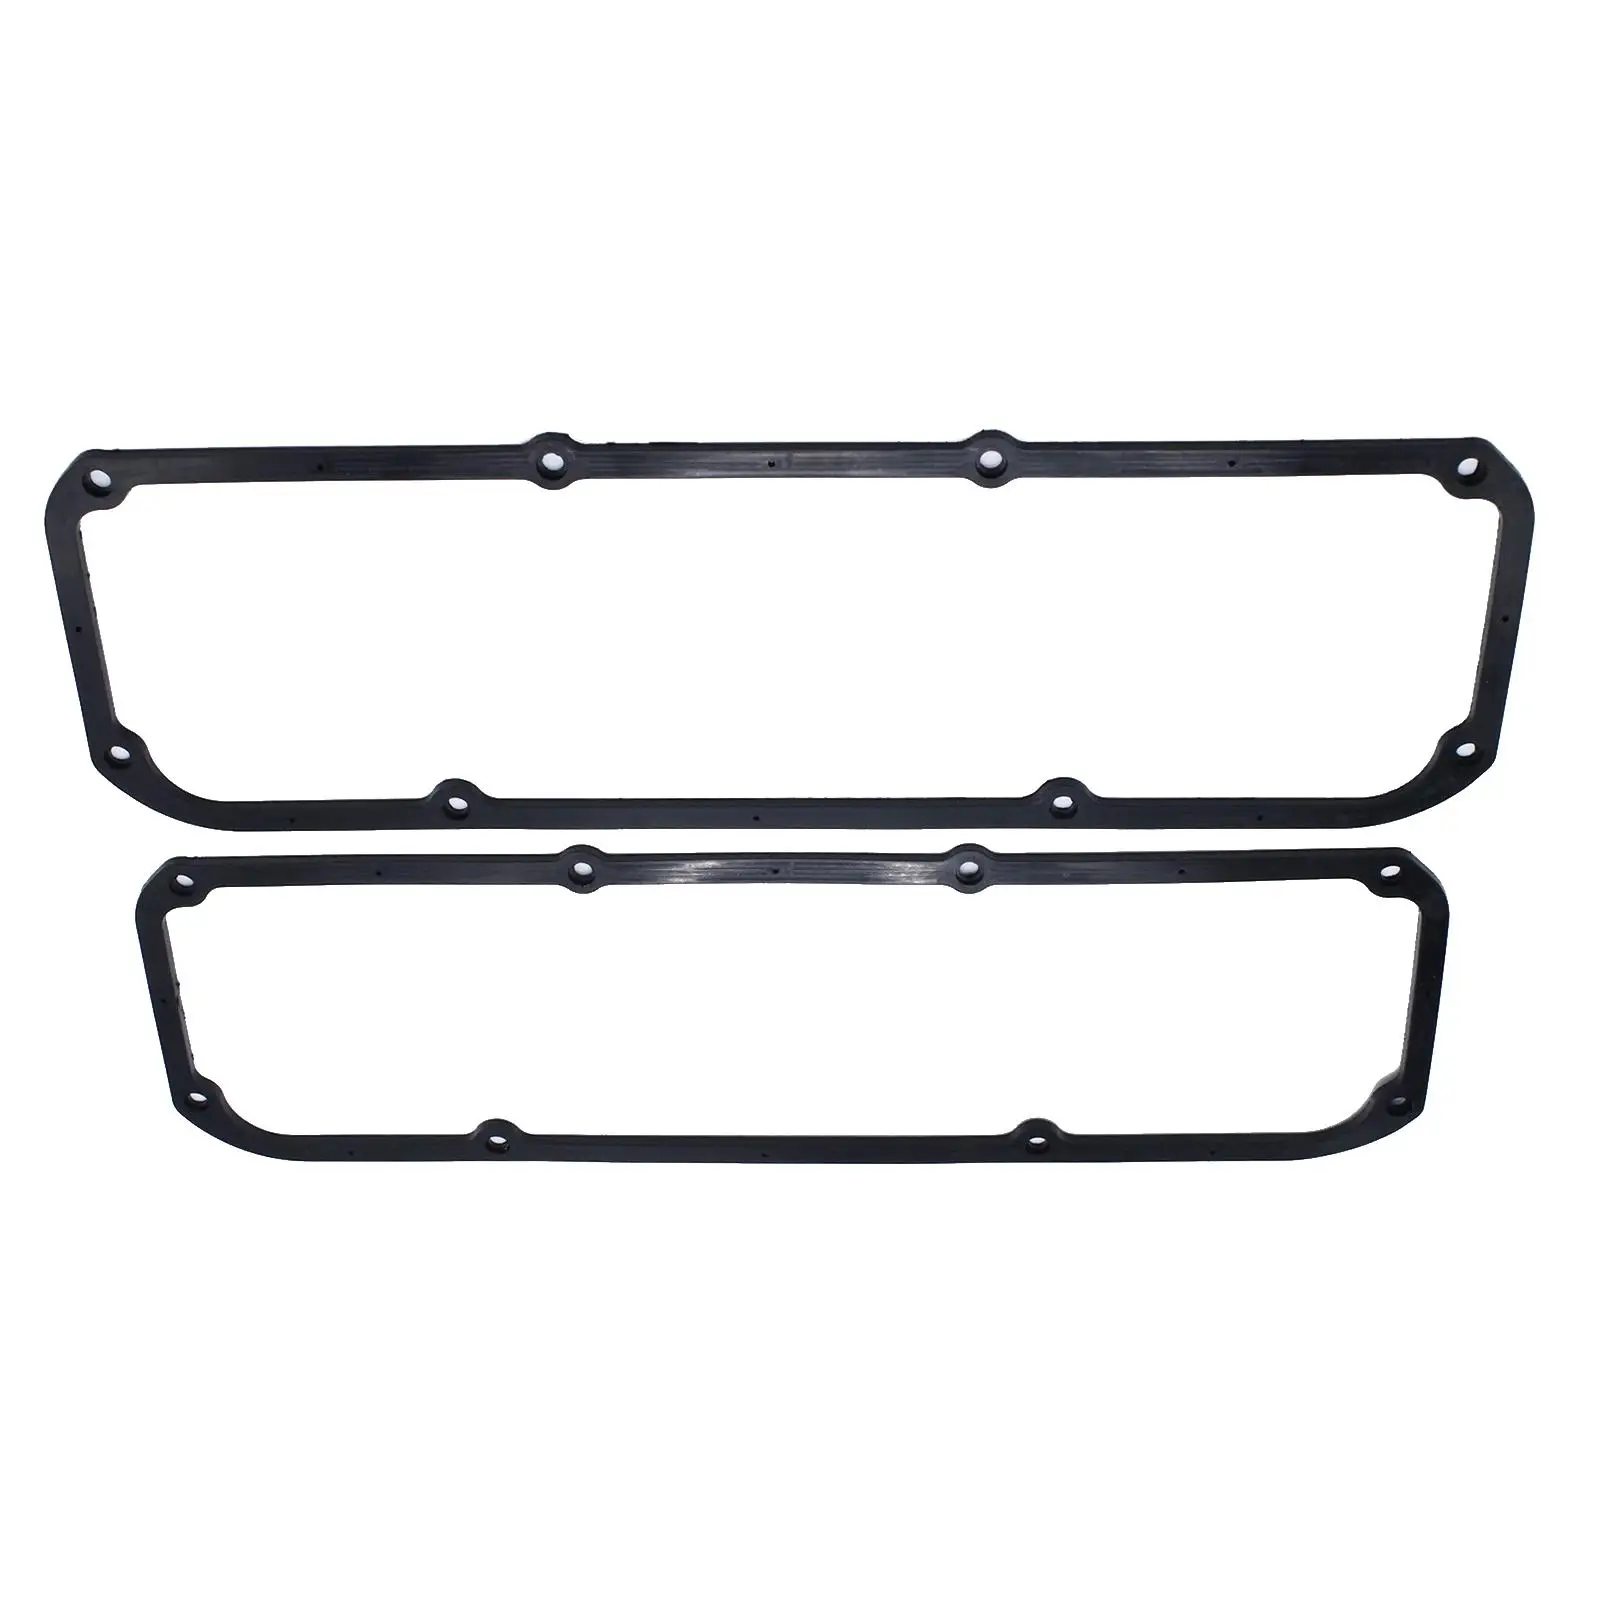 2x Cover Gaskets Kits Kmg02-1 with Steel Shim Core for Ford 351C 351M